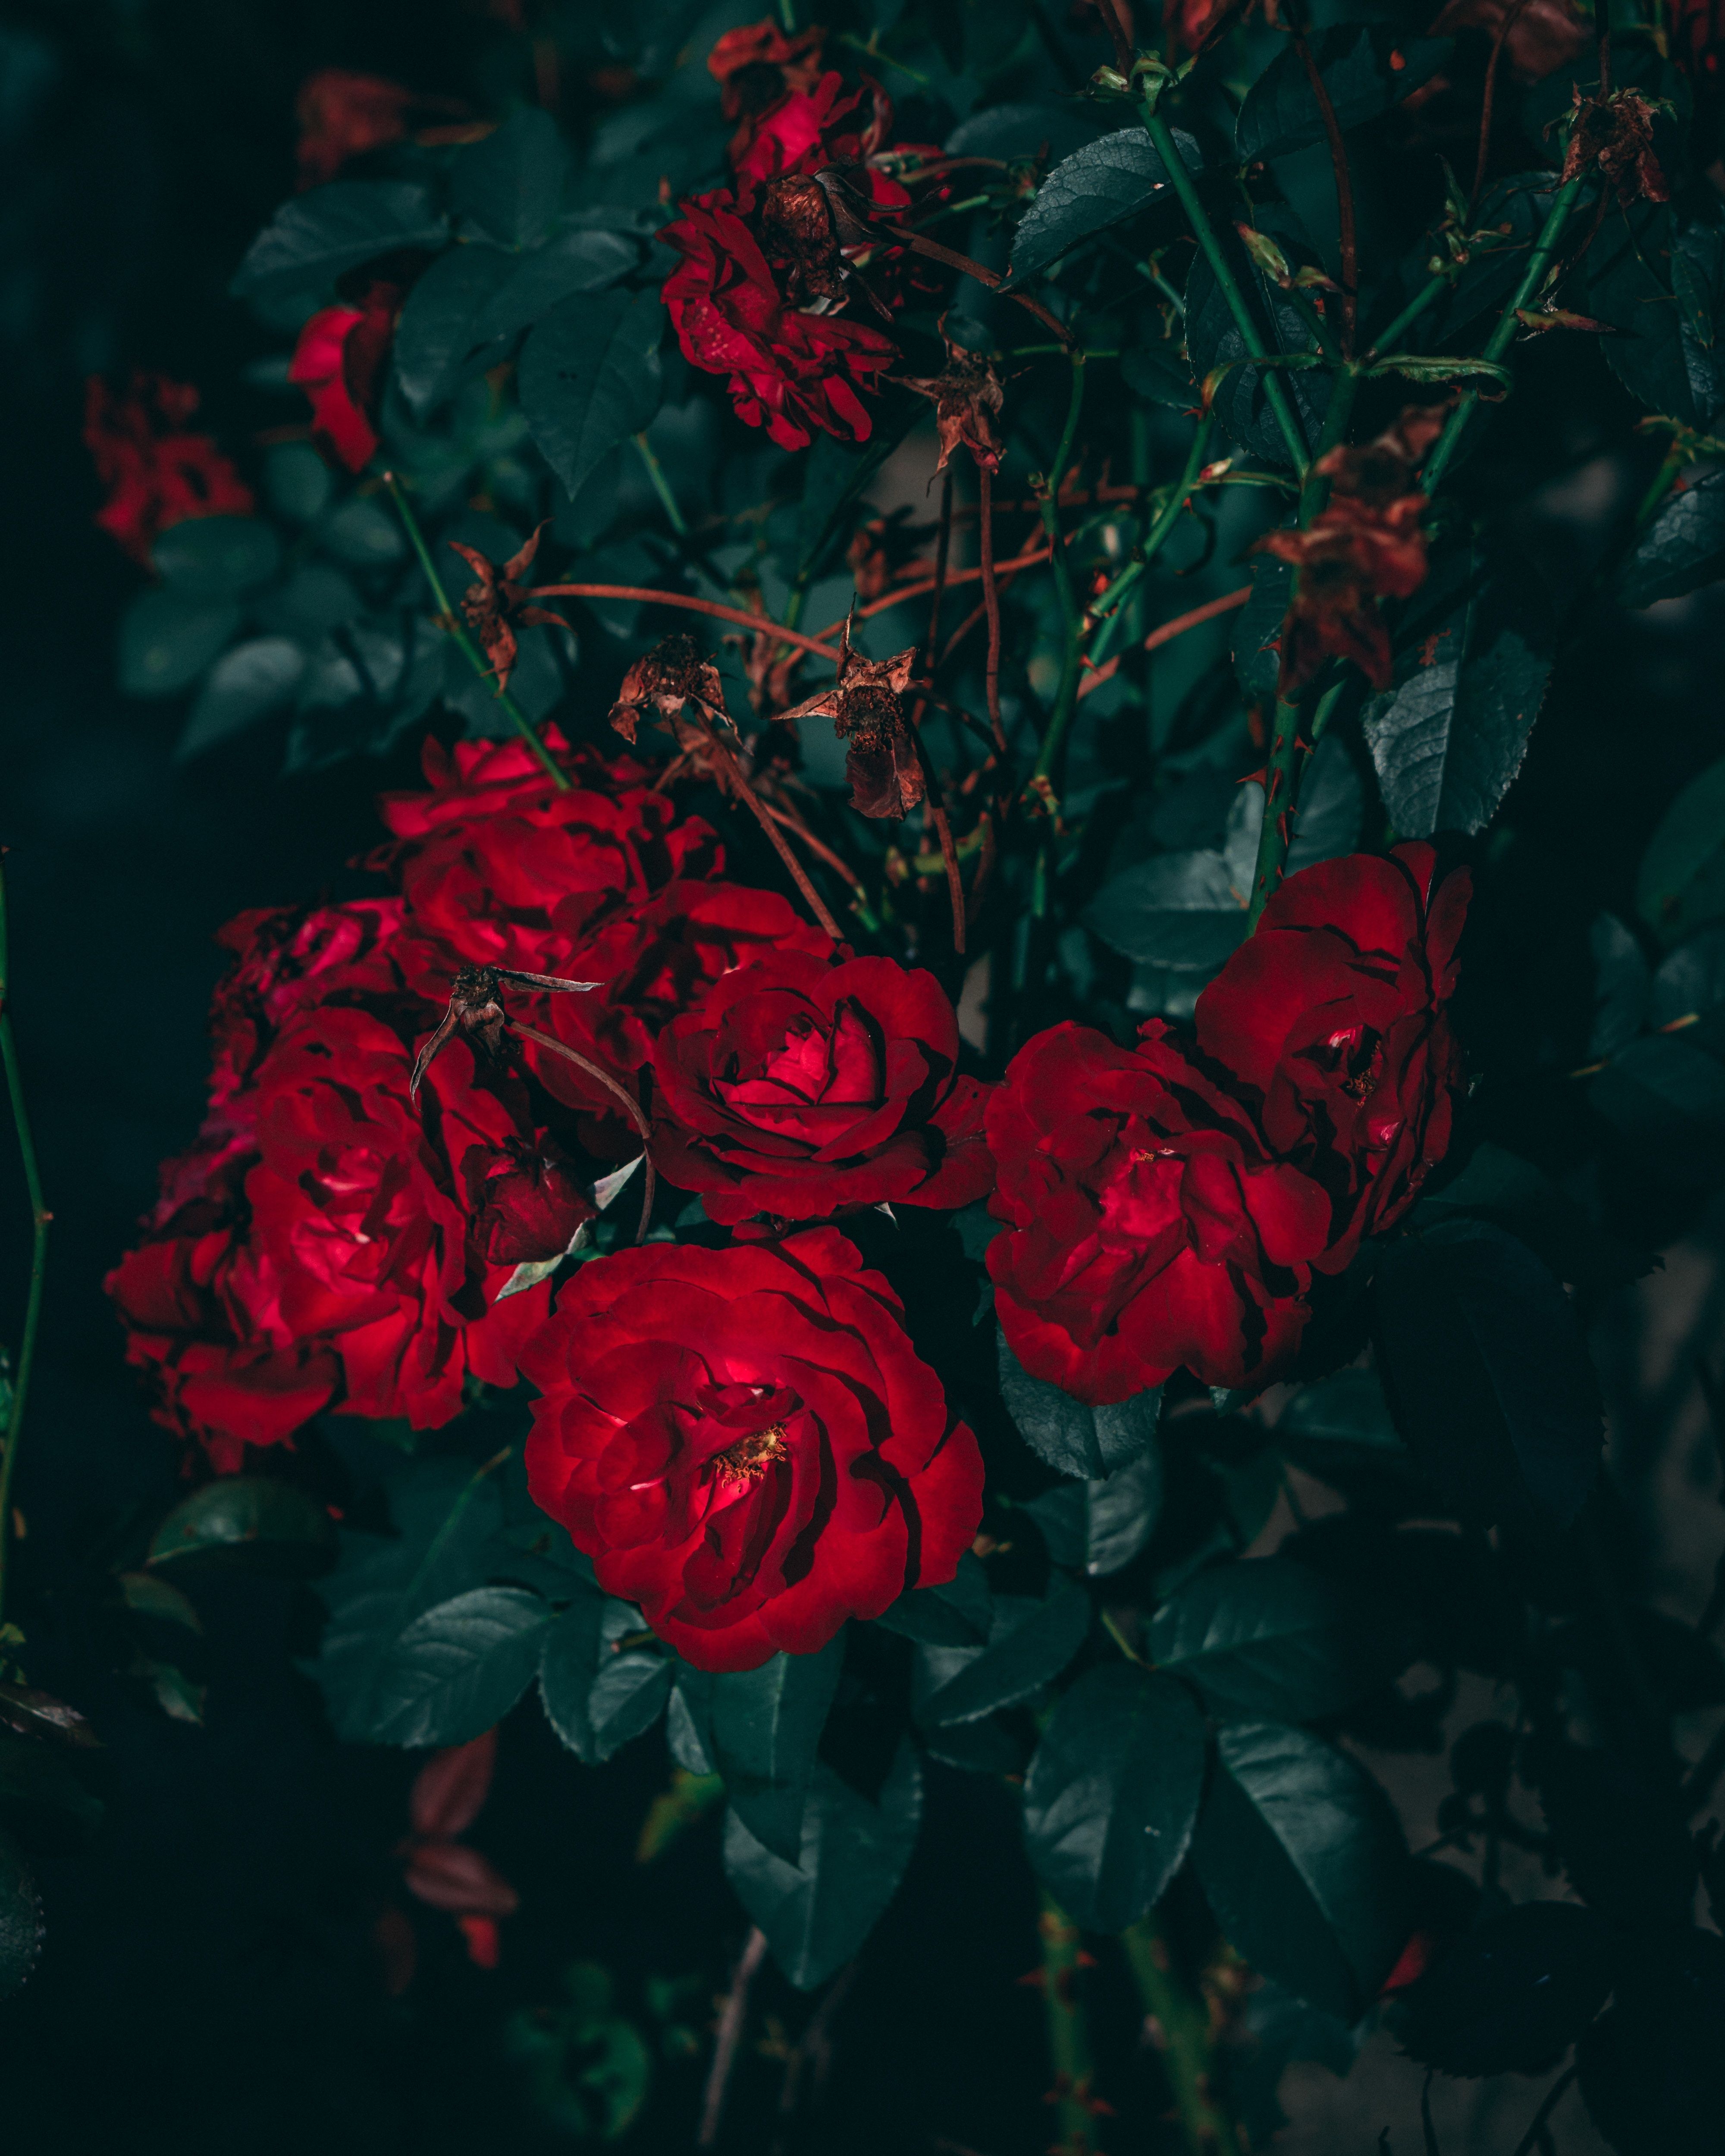 A bunch of red roses in a dark setting. - Roses